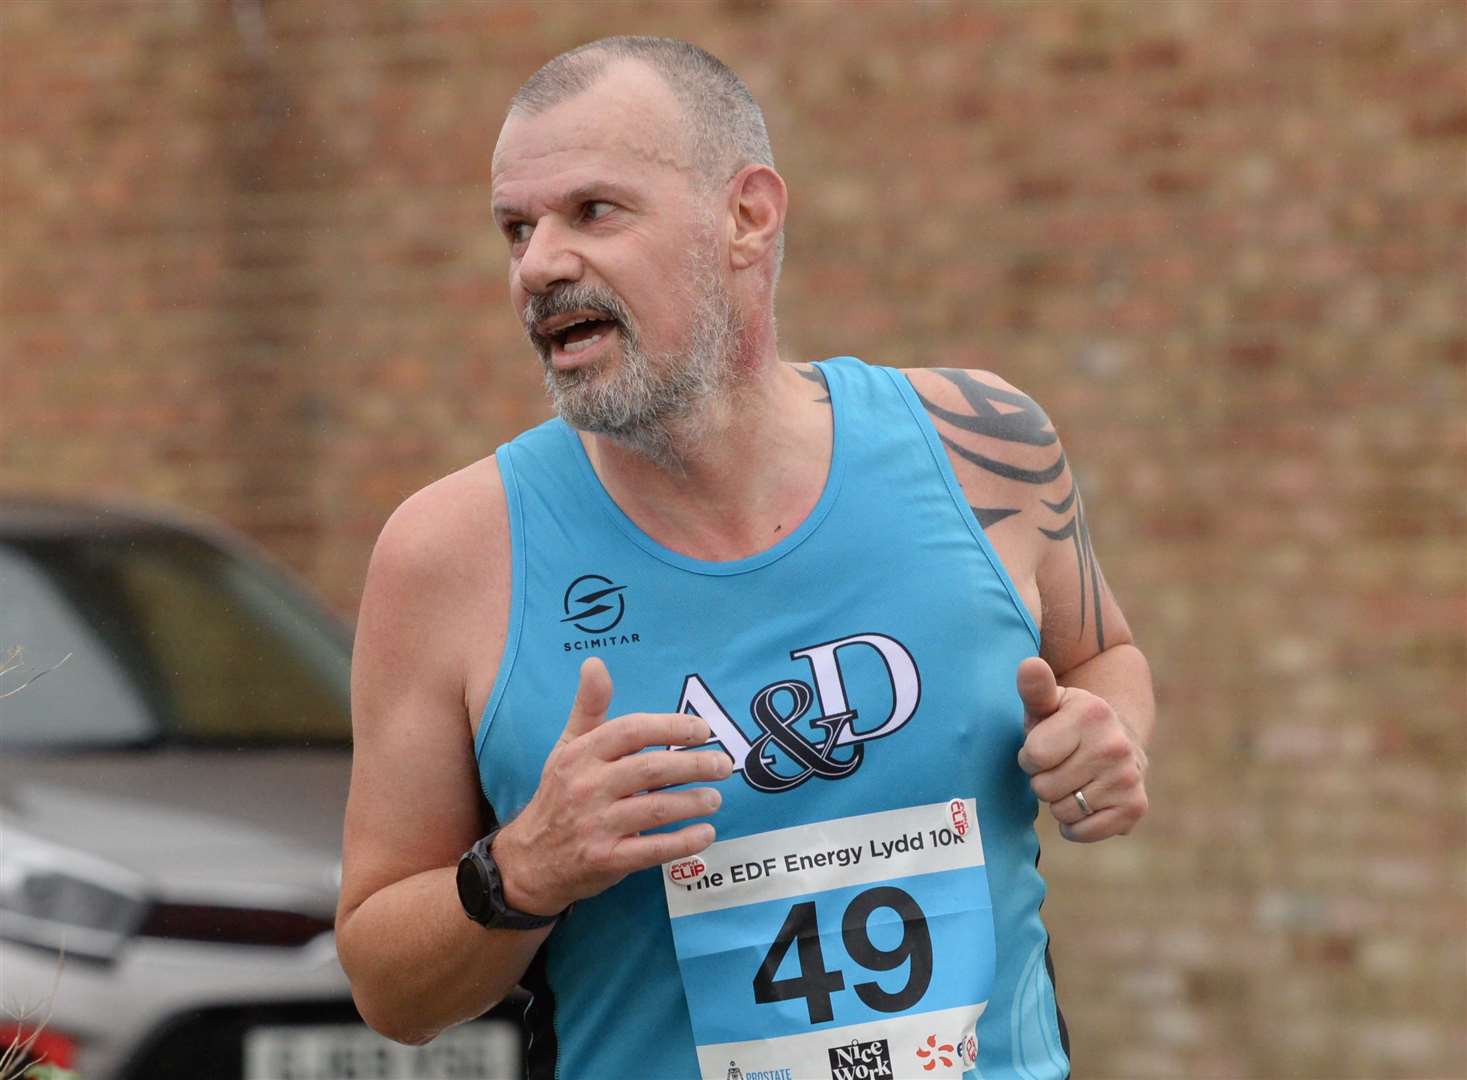 Andy Dedman of Ashford & District Road Running Club. Picture: Chris Davey (53045563)